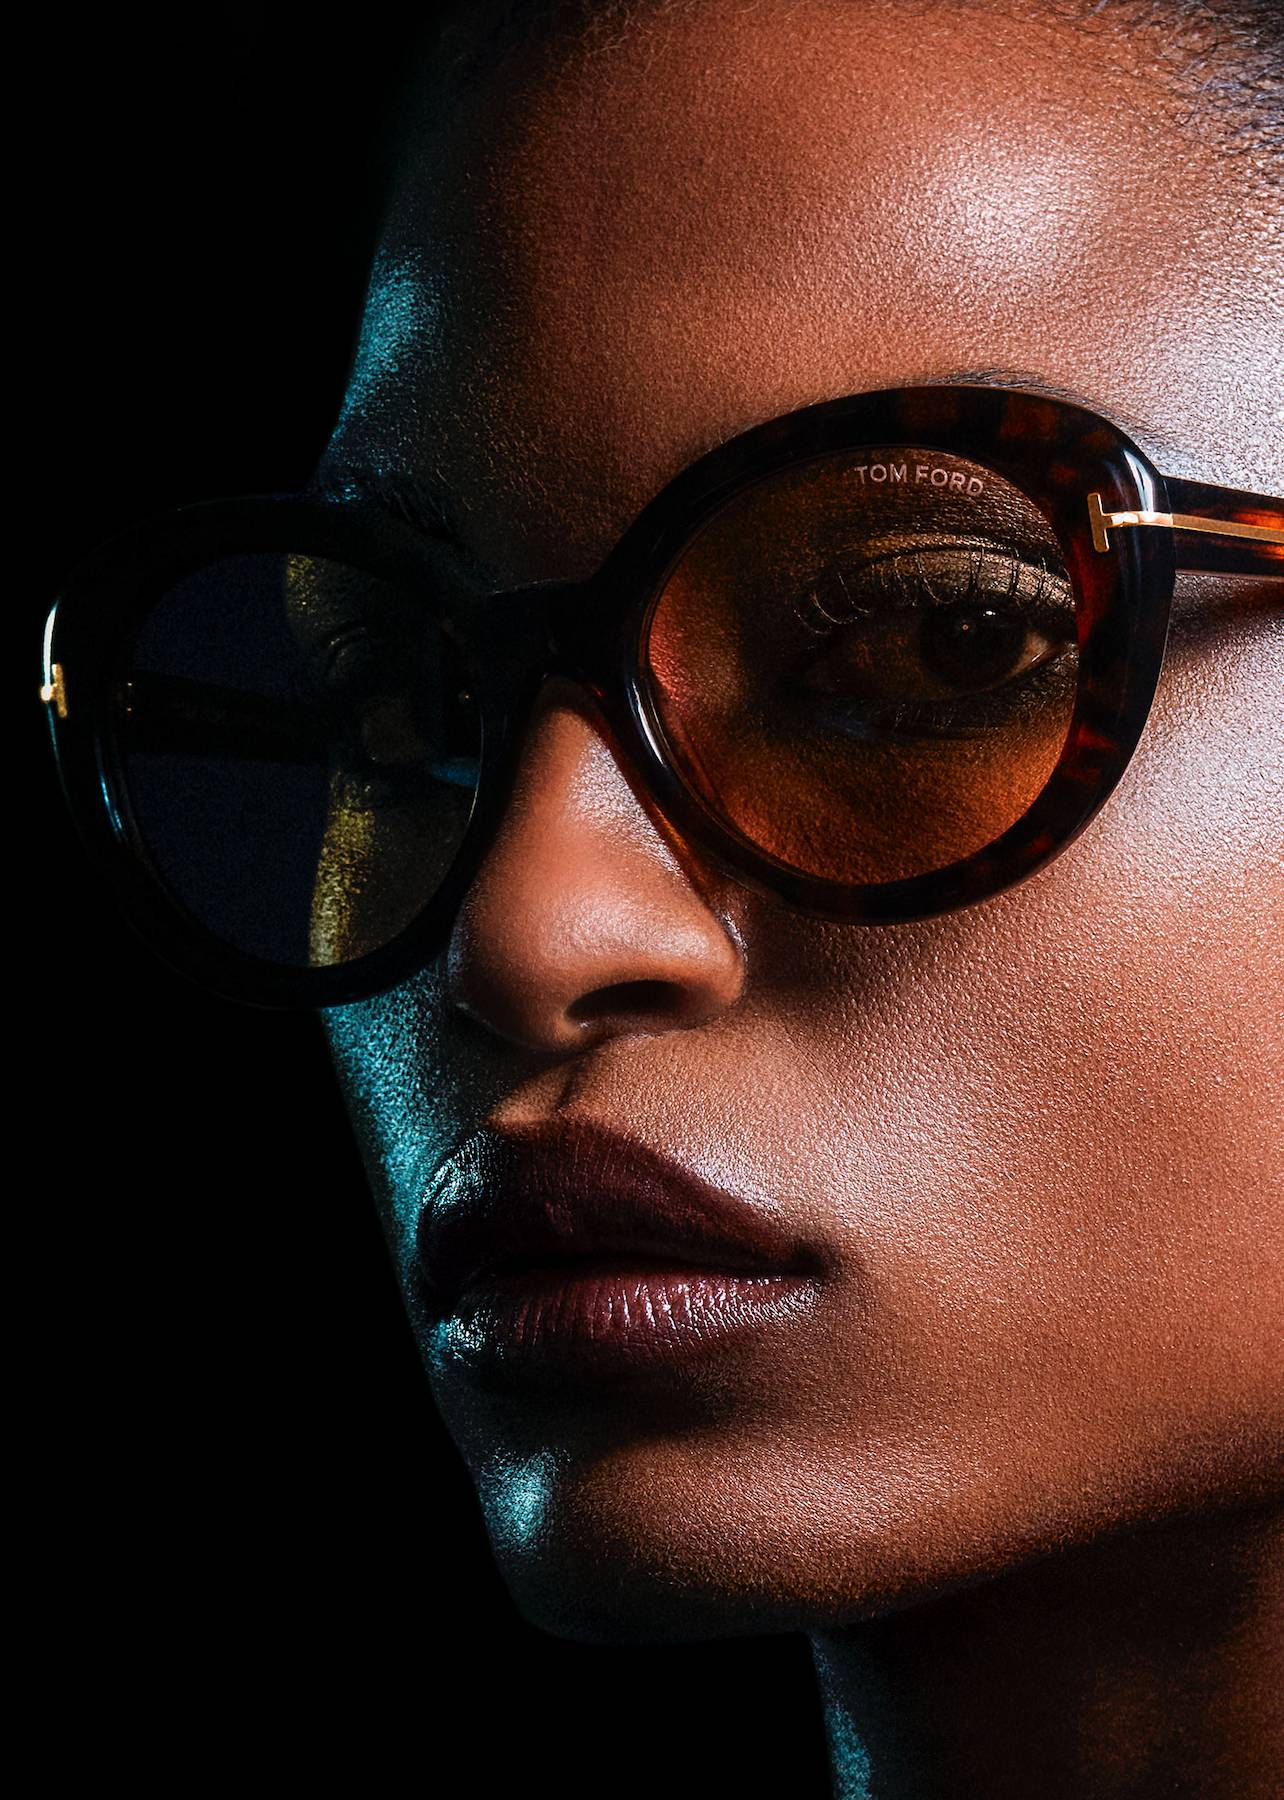 TOM FORD EYEWEAR COLLECTION WITH PHOTOCHROMATIC LENSES: FUNCTIONALITY ...